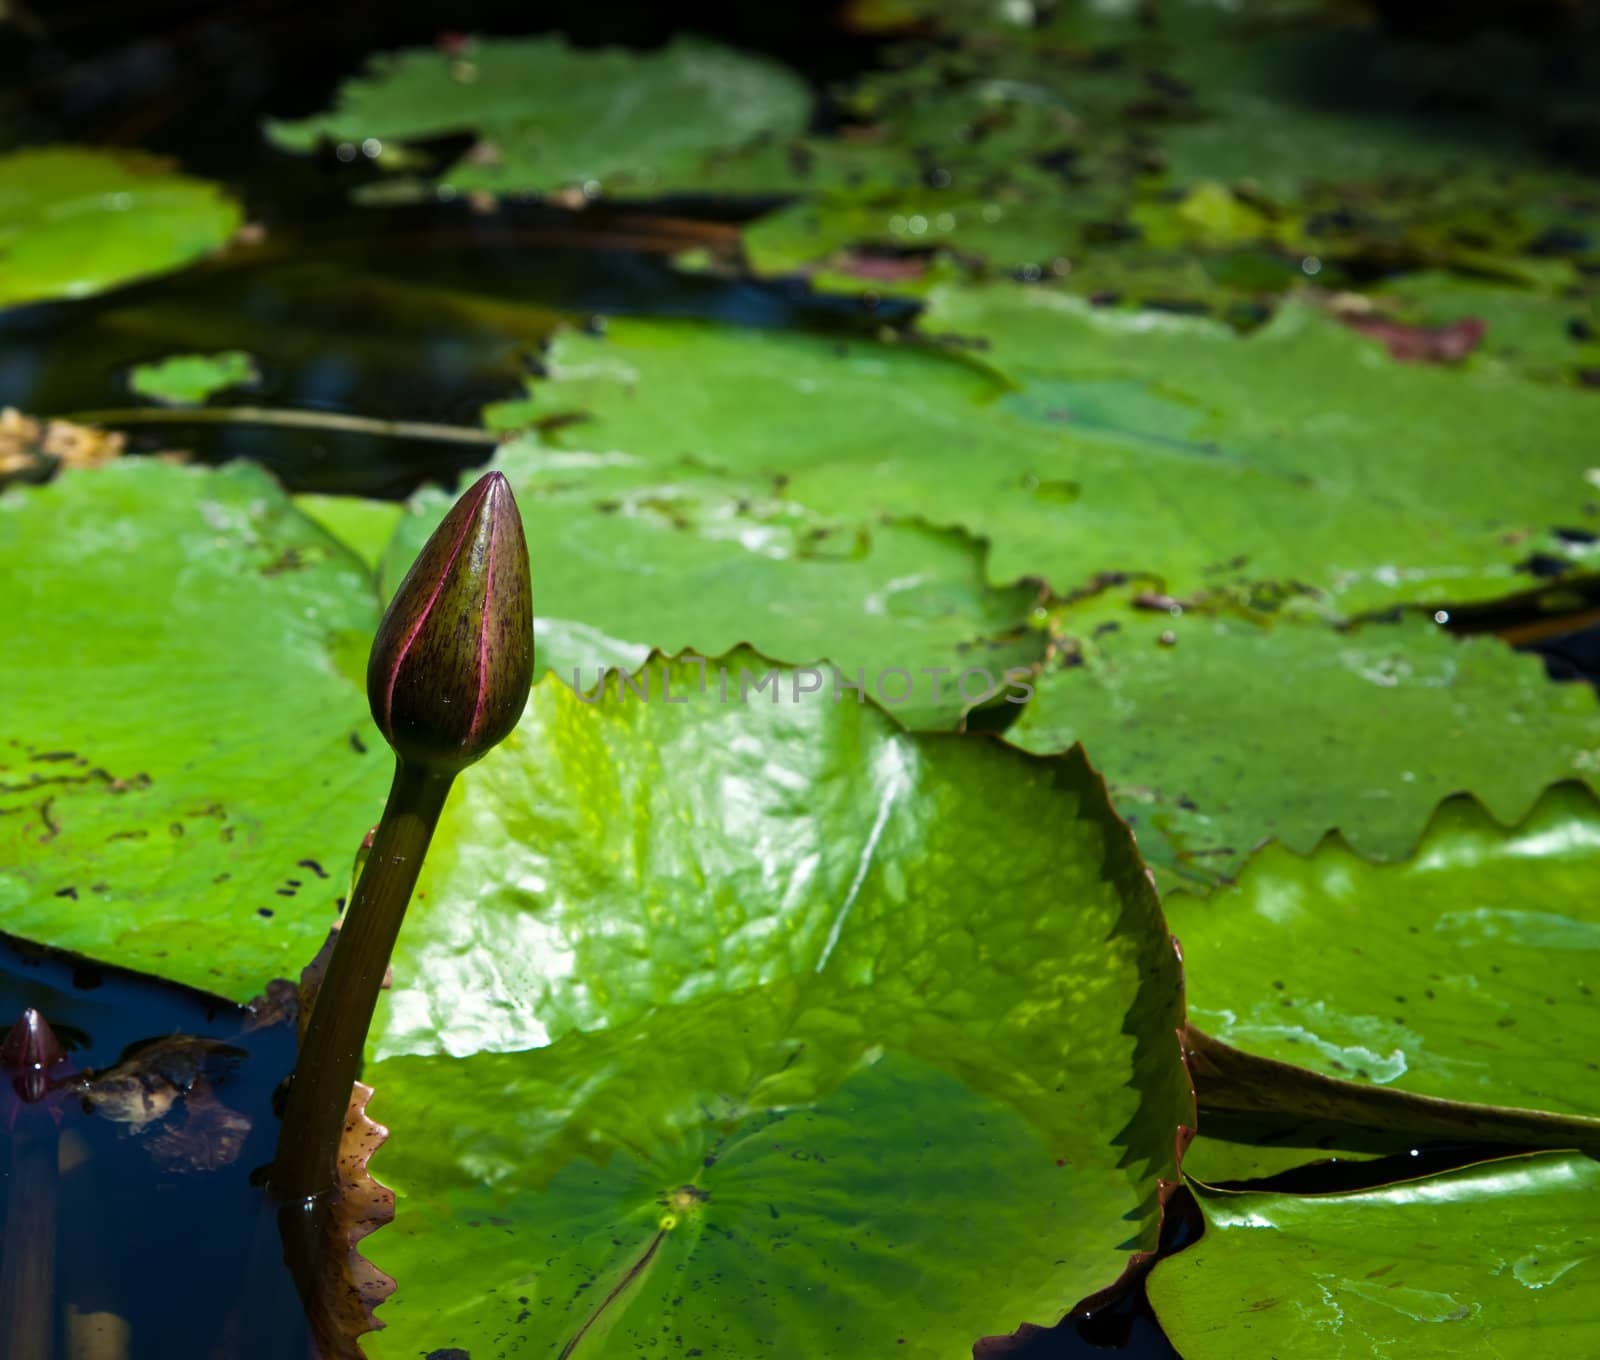 Nymphaea is a genus of aquatic plants in the family Nymphaeaceae. There are about 50 species in the genus, which has a cosmopolitan distribution